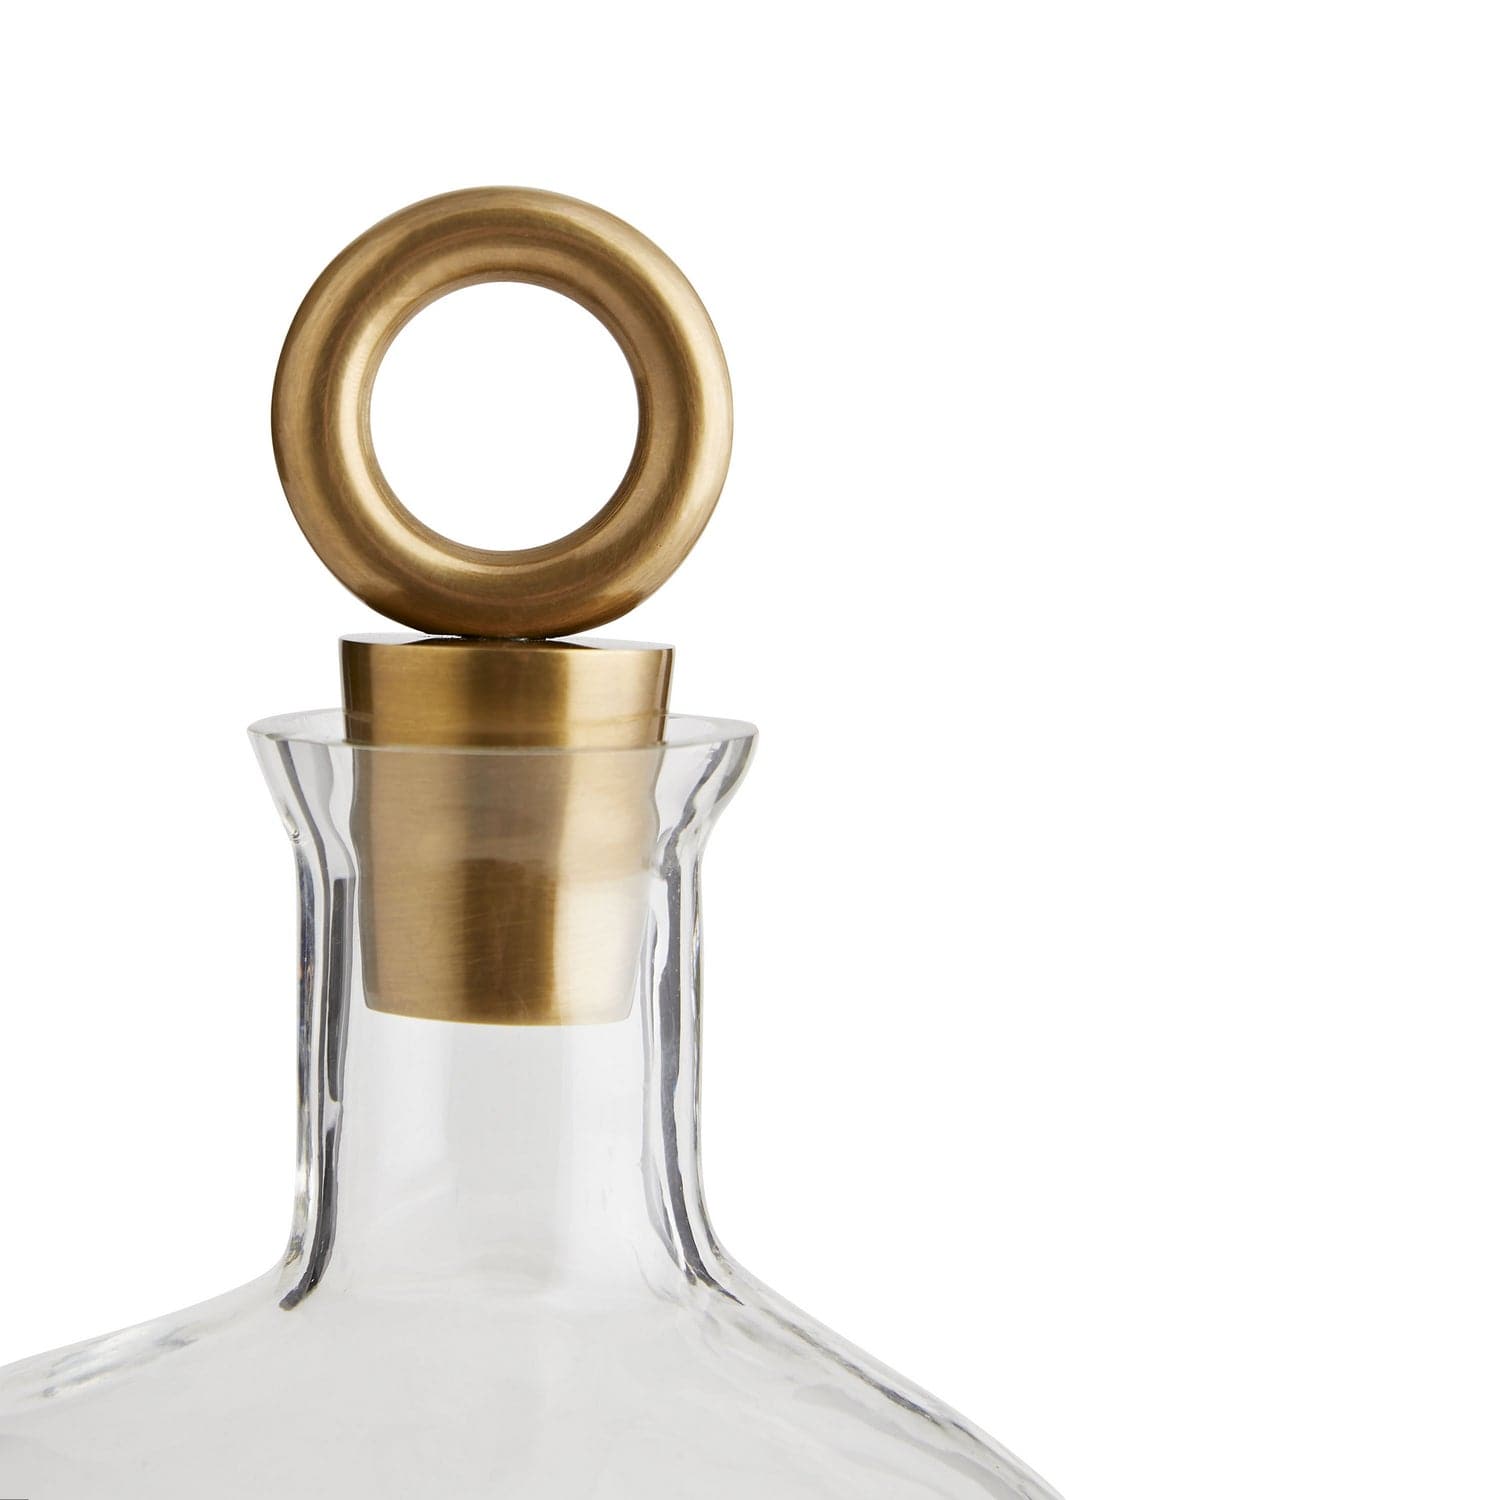 Decanter, set of 2 from the Frances collection in Clear finish